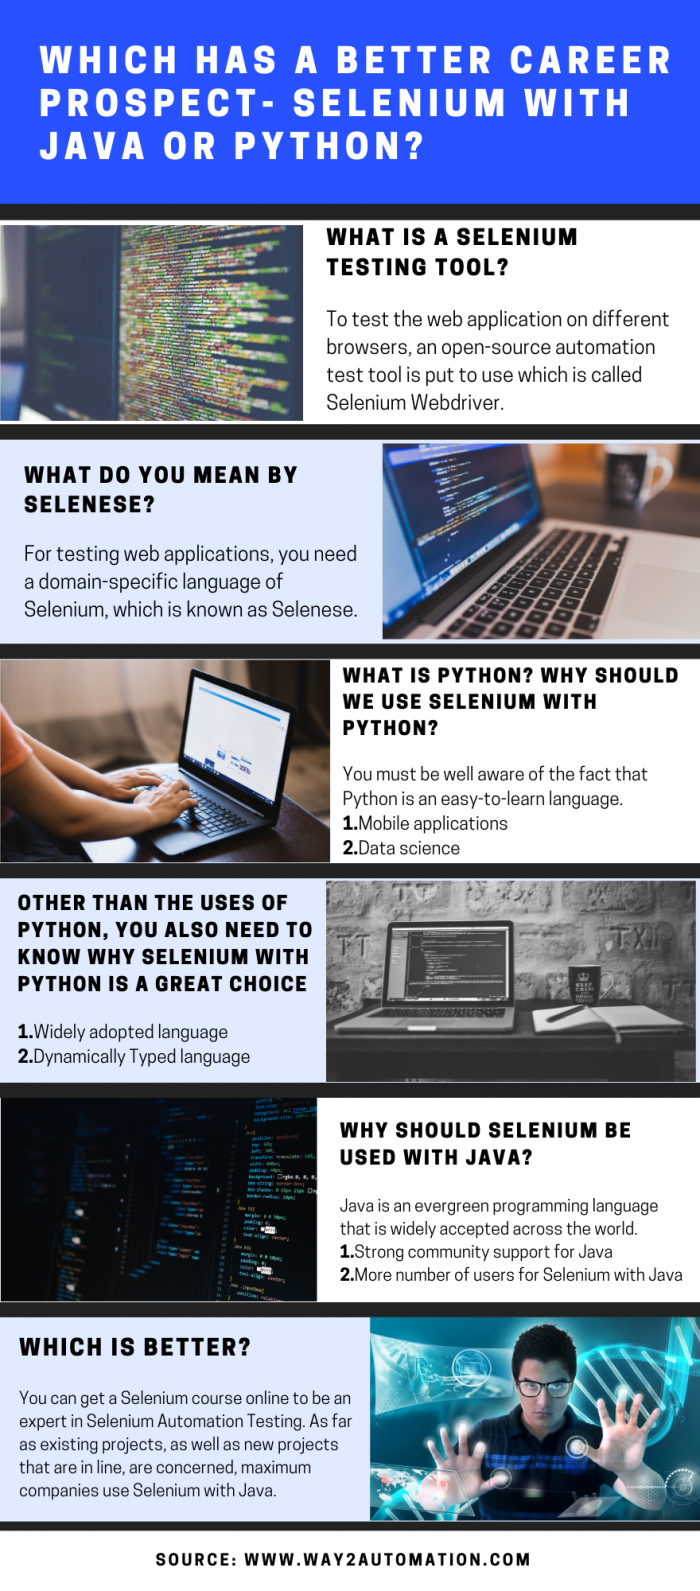 Which has a better career prospect- Selenium with Java or Python?